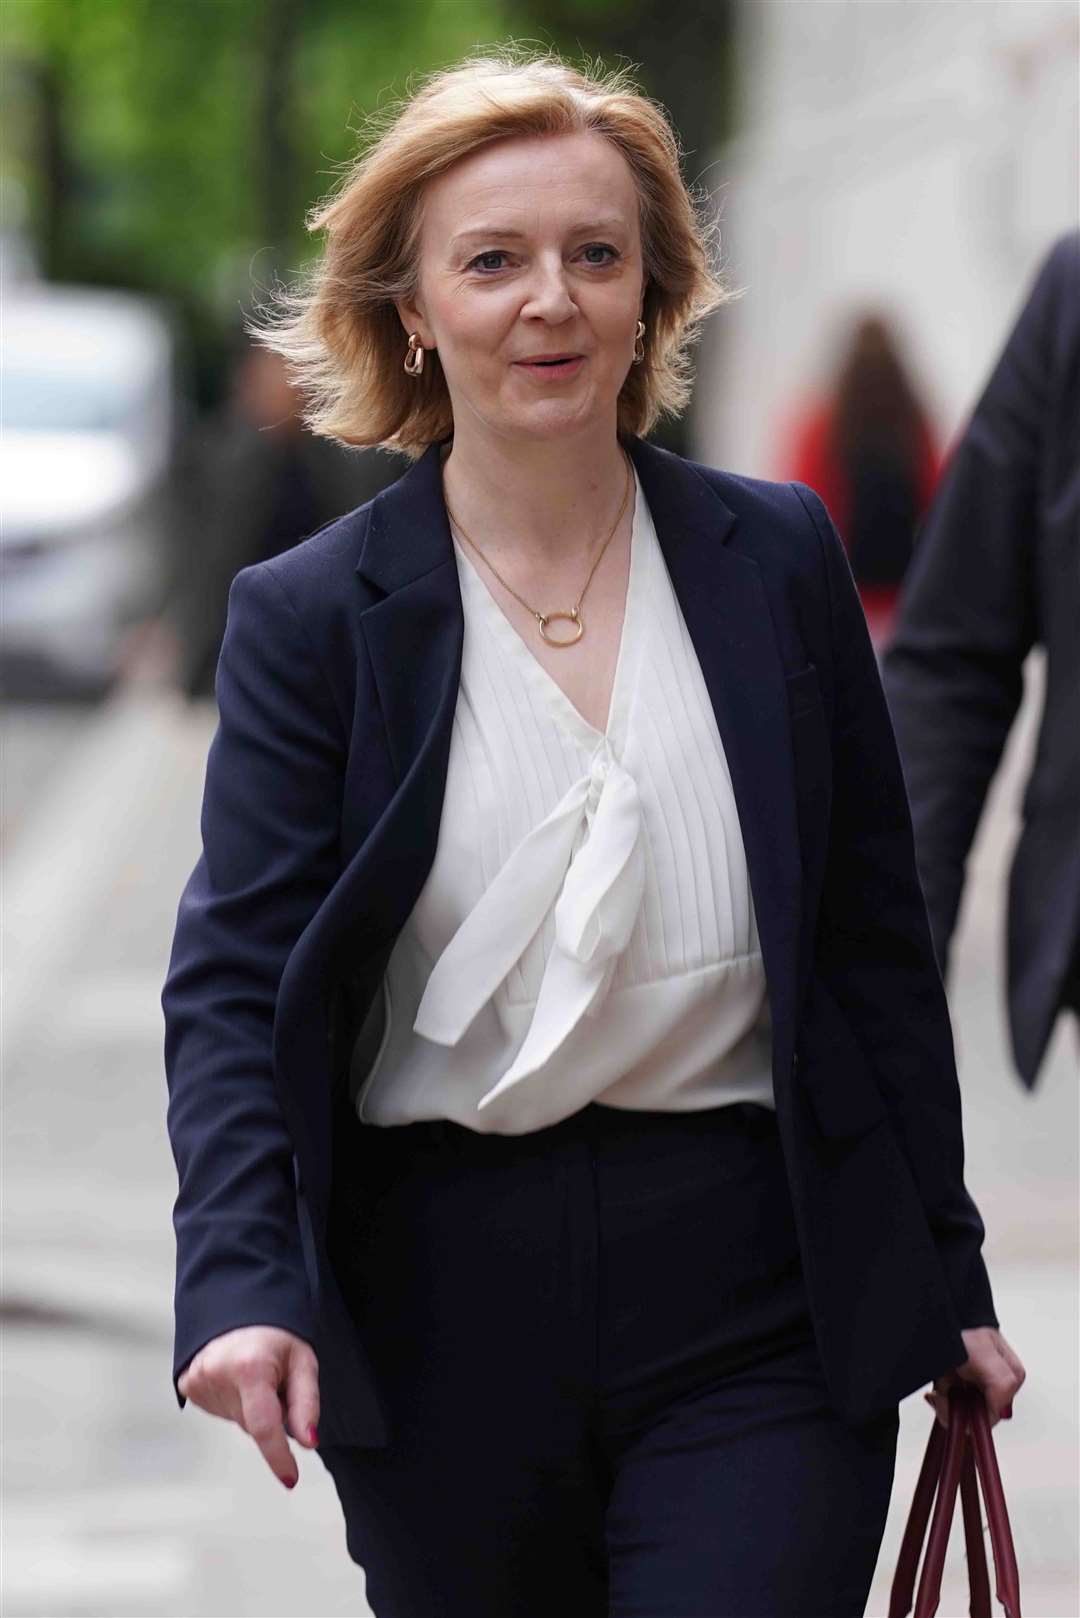 Liz Truss has vowed to cut taxes immediately (Kirsty O’Connor/PA)